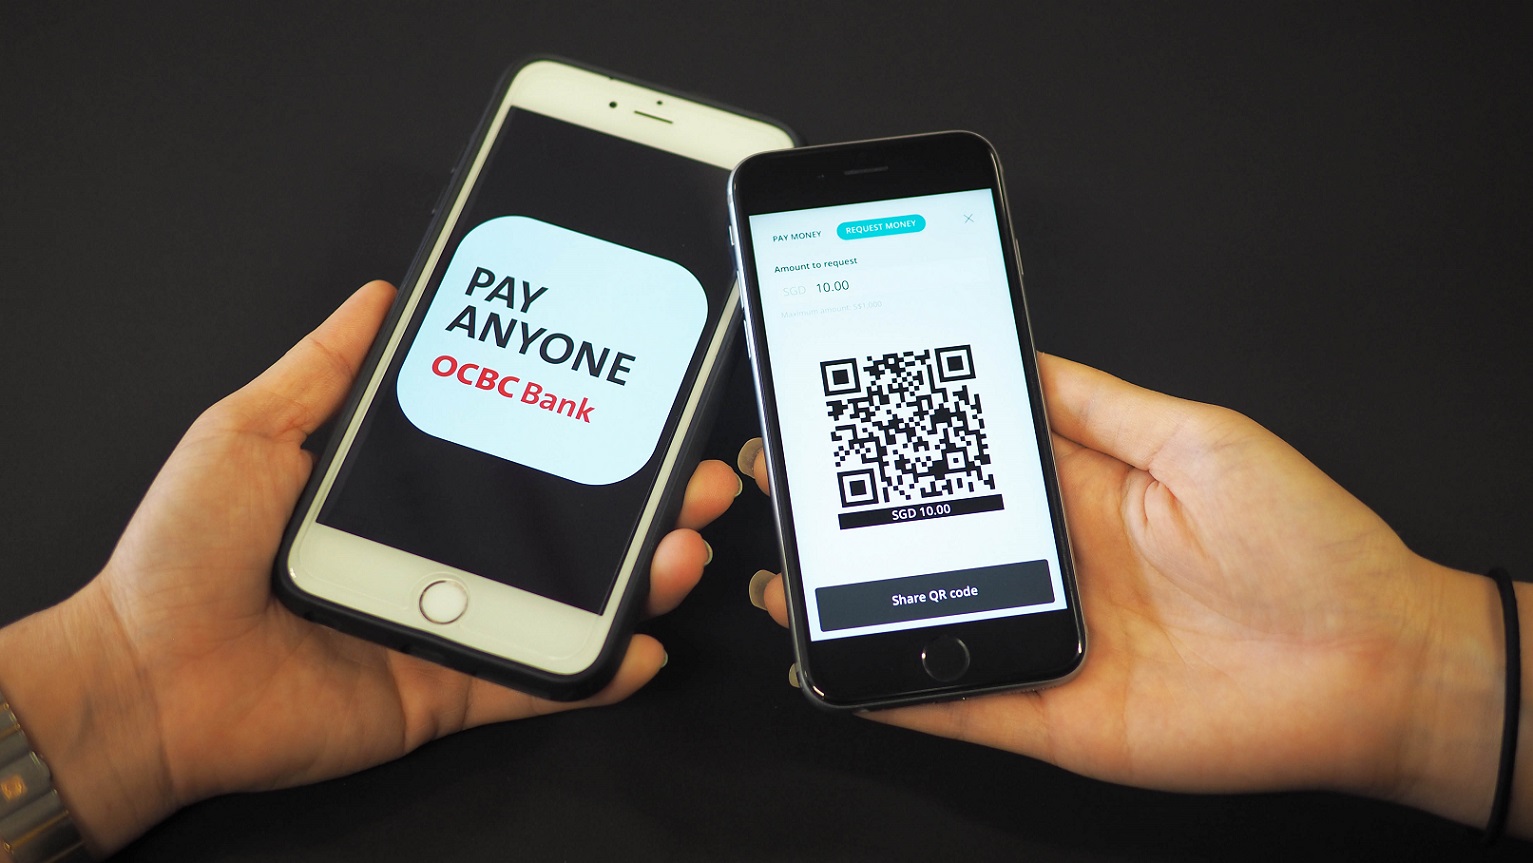 OCBC Bank enables account-to-account QR code funds transfers on PayNow